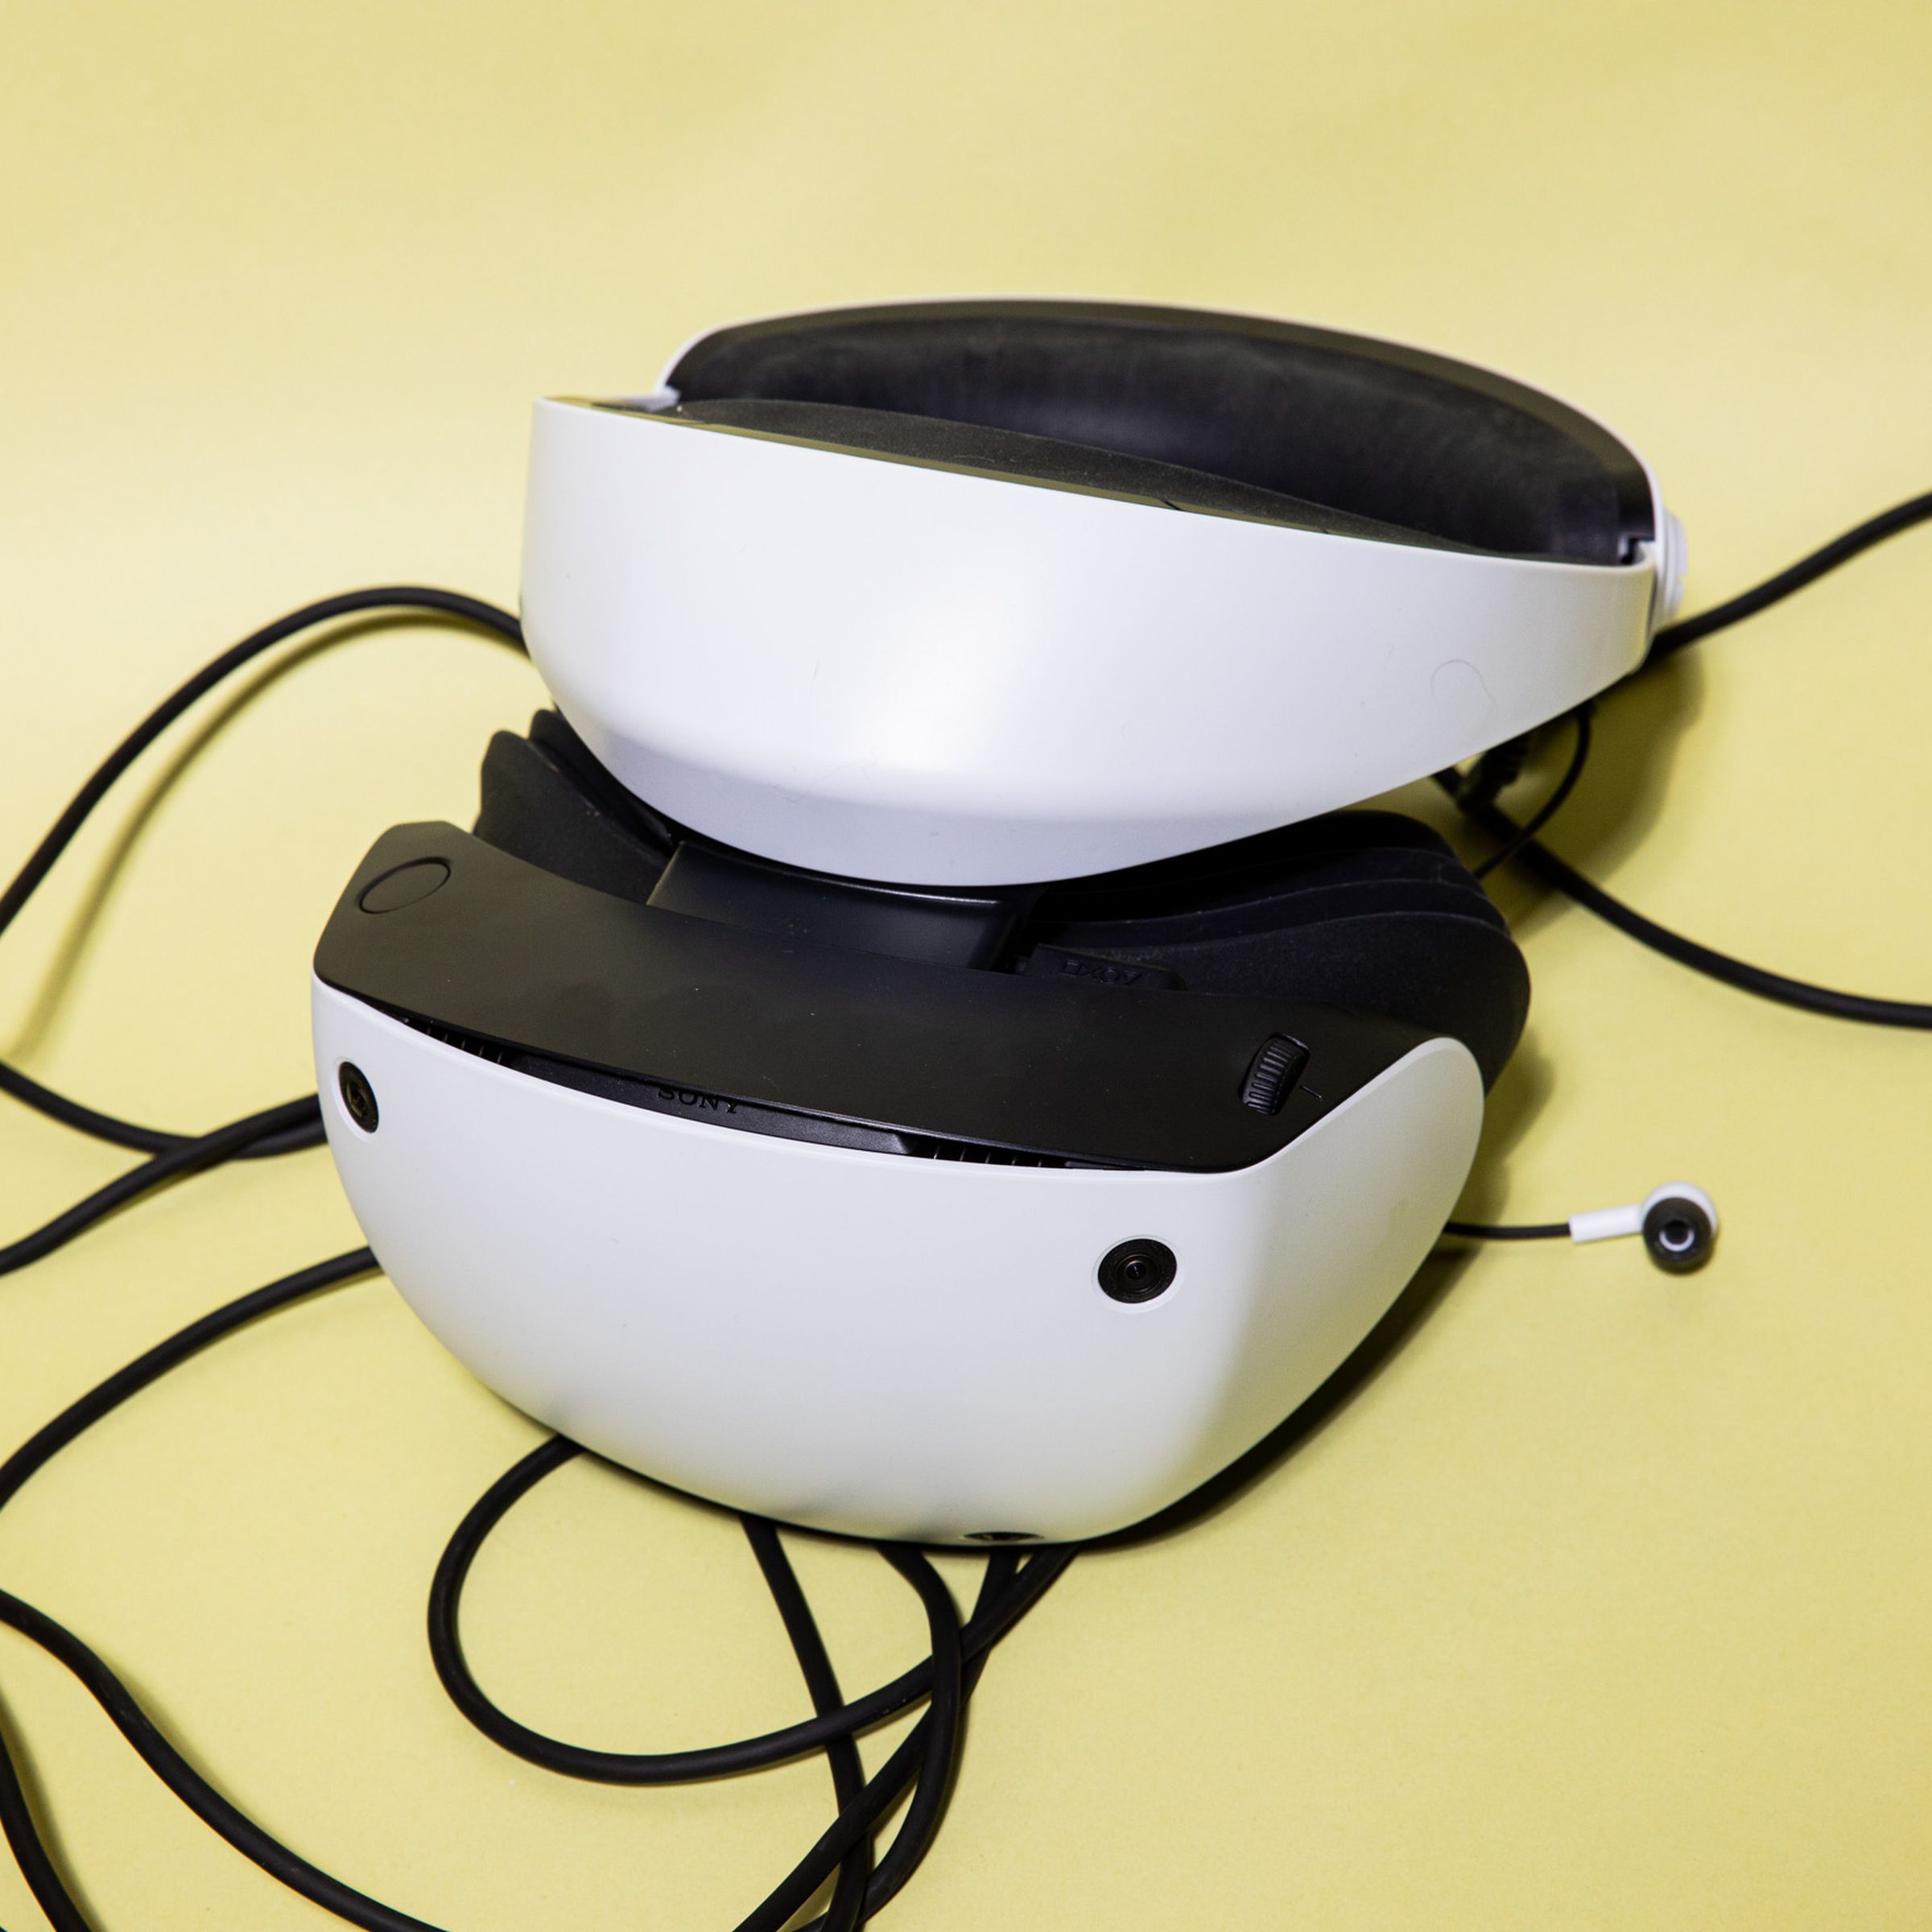 A photo of the PlayStation VR2 headset.